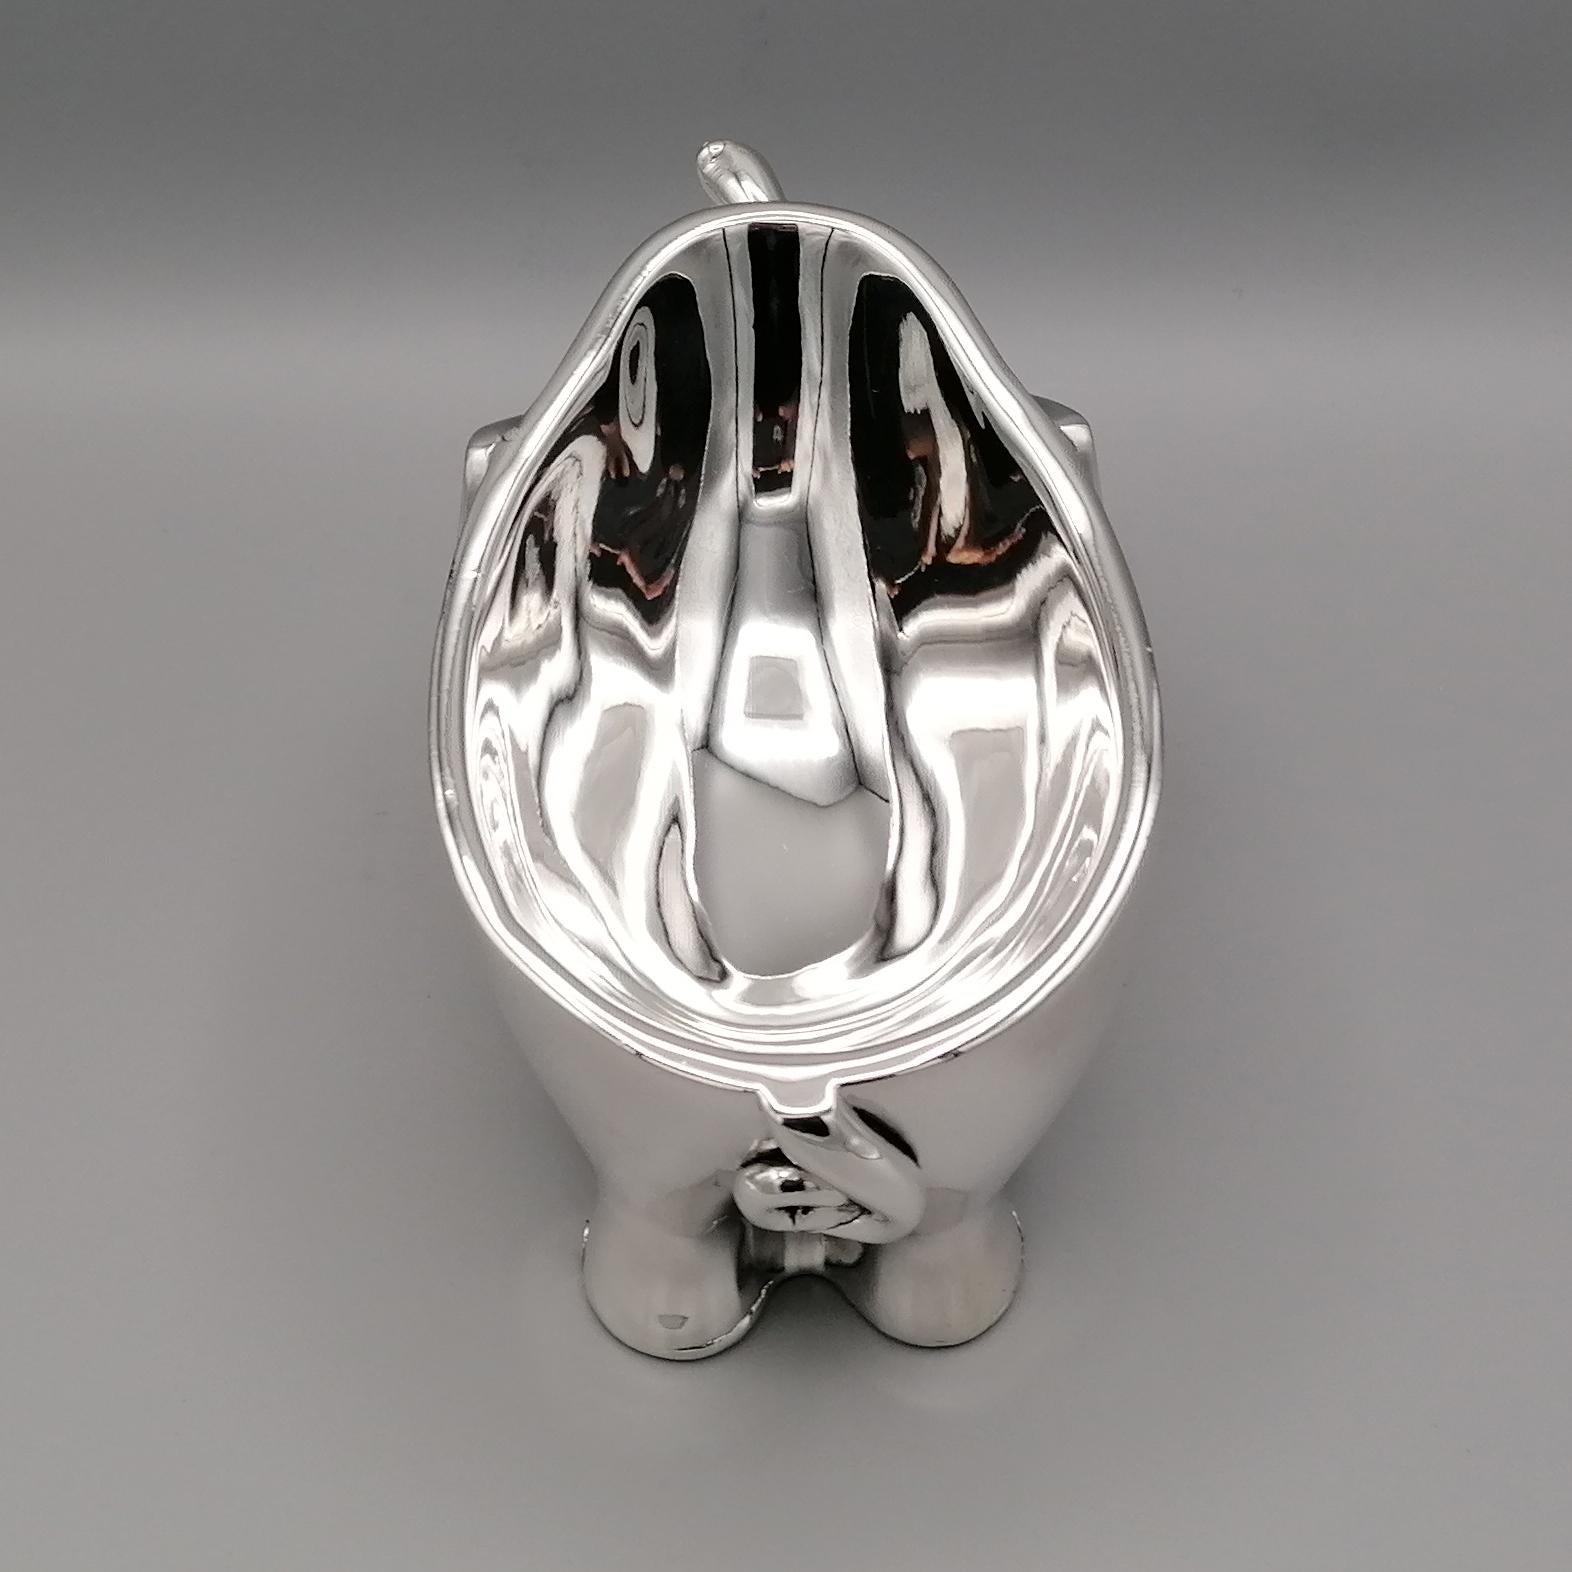 Late 20th Century 20th Century Sterling Silver Stylized Elephant Shaped Soap / Candy Holder